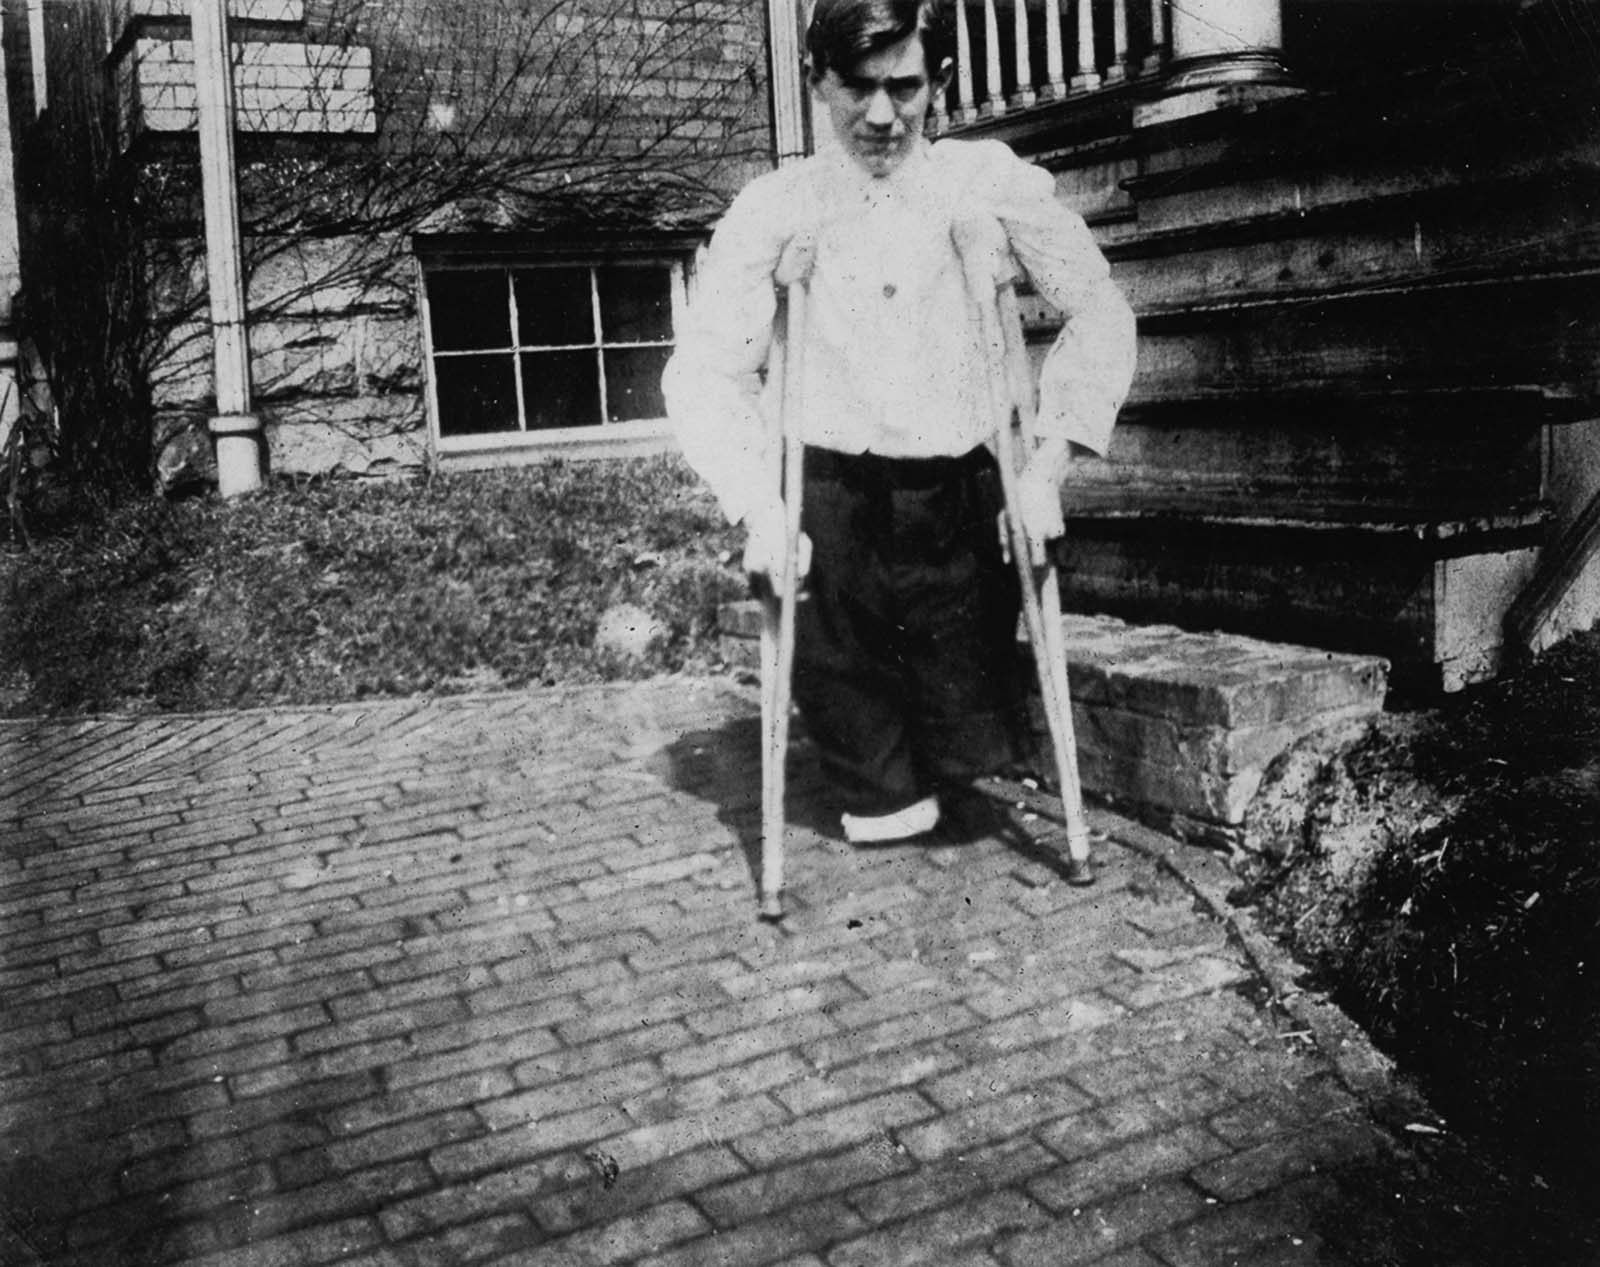 Nola McKinney, whose legs were cut off by a motor car in a coal mine in West Virginia when he was 14 years old, 1910